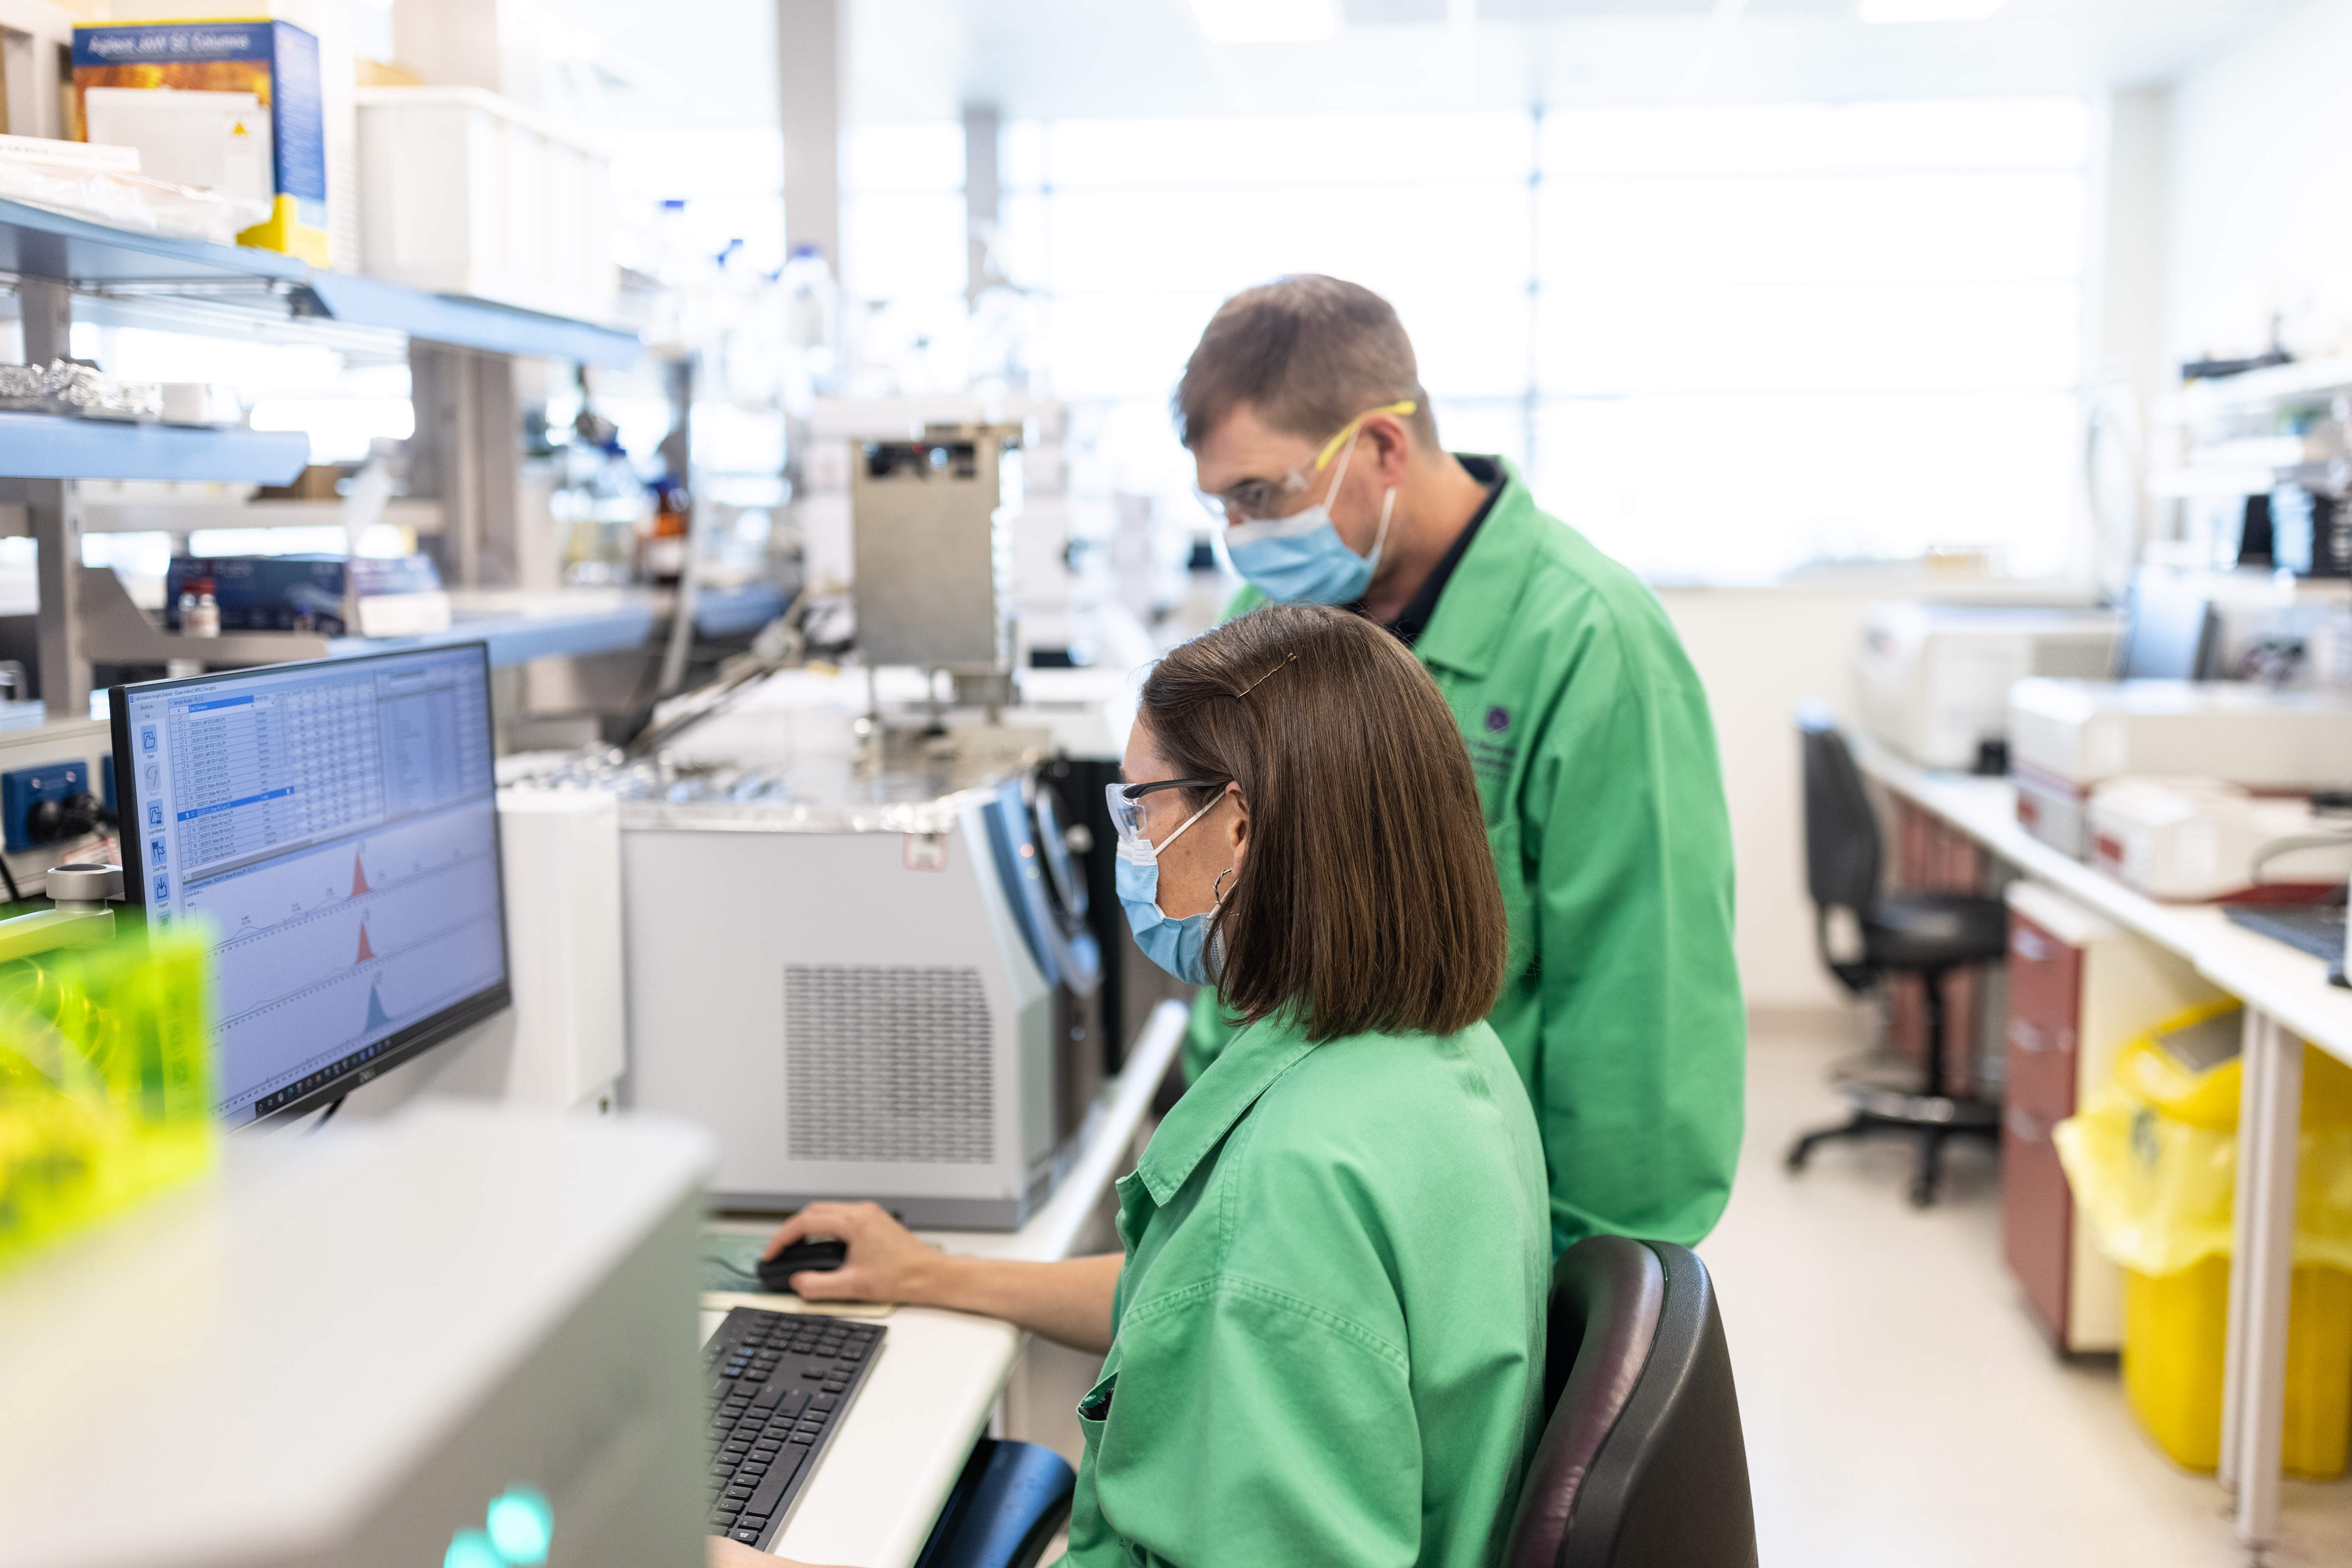 Prof Kevin Thomas in a QAEHS laboratory setting with Dr Cassie Rauert. Both looking at experimental results on a computer screen, wearing green lab coats, masks and protective eyewear. Photo: The University of Queensland.